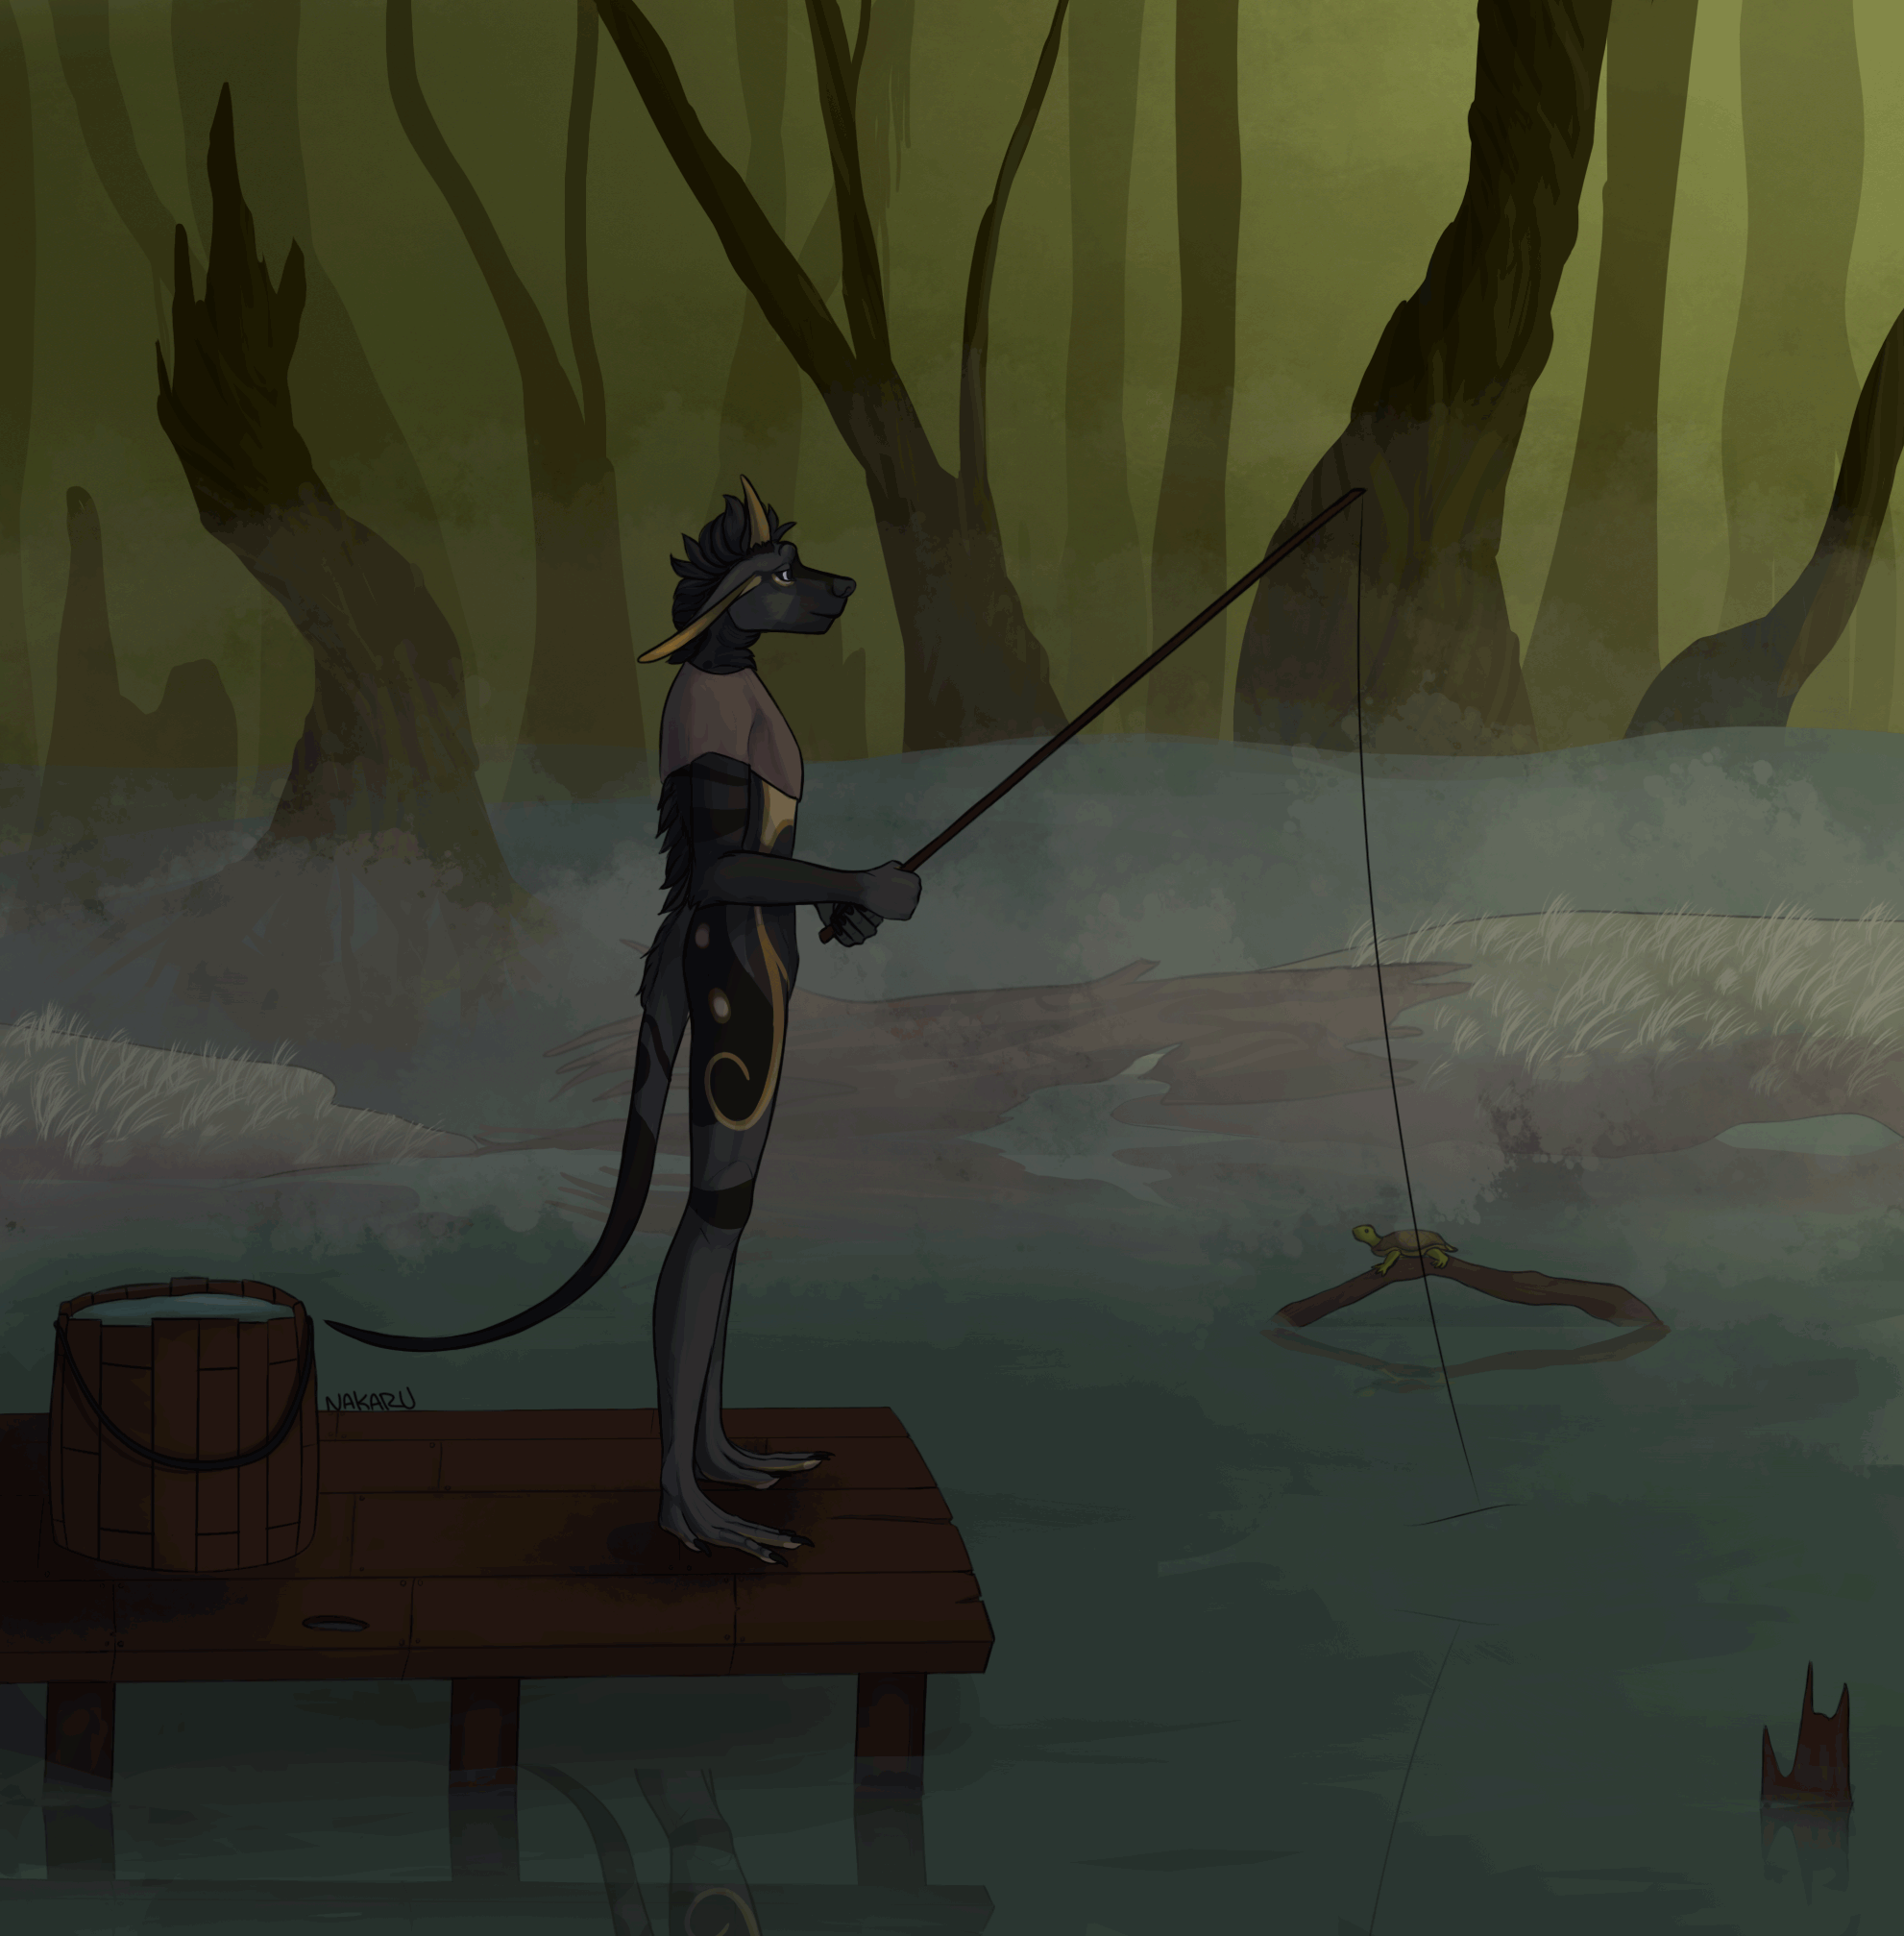 Lysander fishing gif by Evee4ever228 on DeviantArt